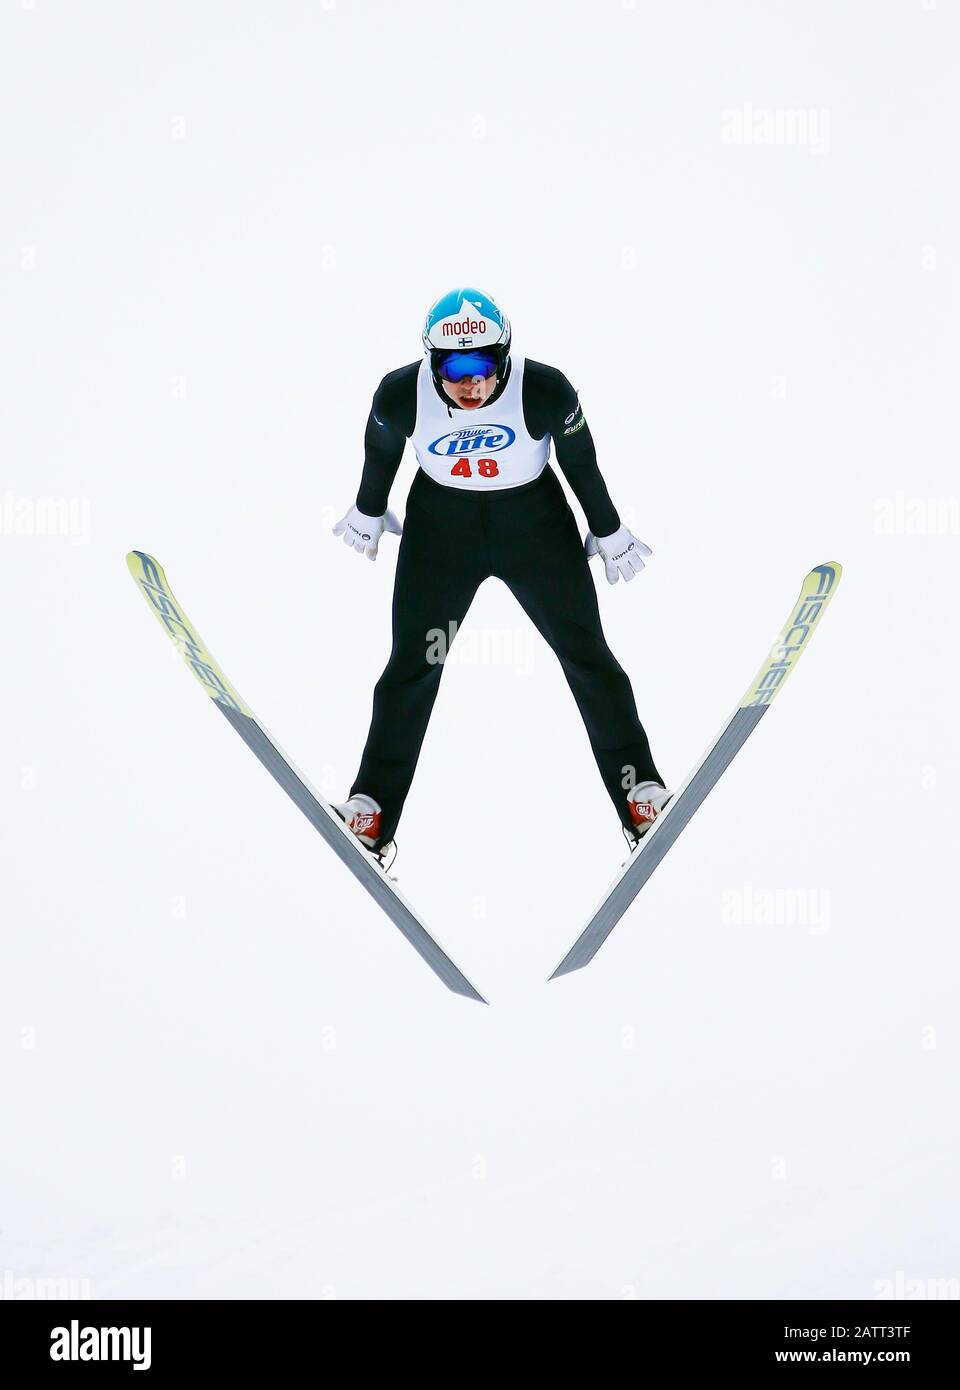 Niko Loytainen of Finland ski jumps off a 70 meter hill. Stock Photo